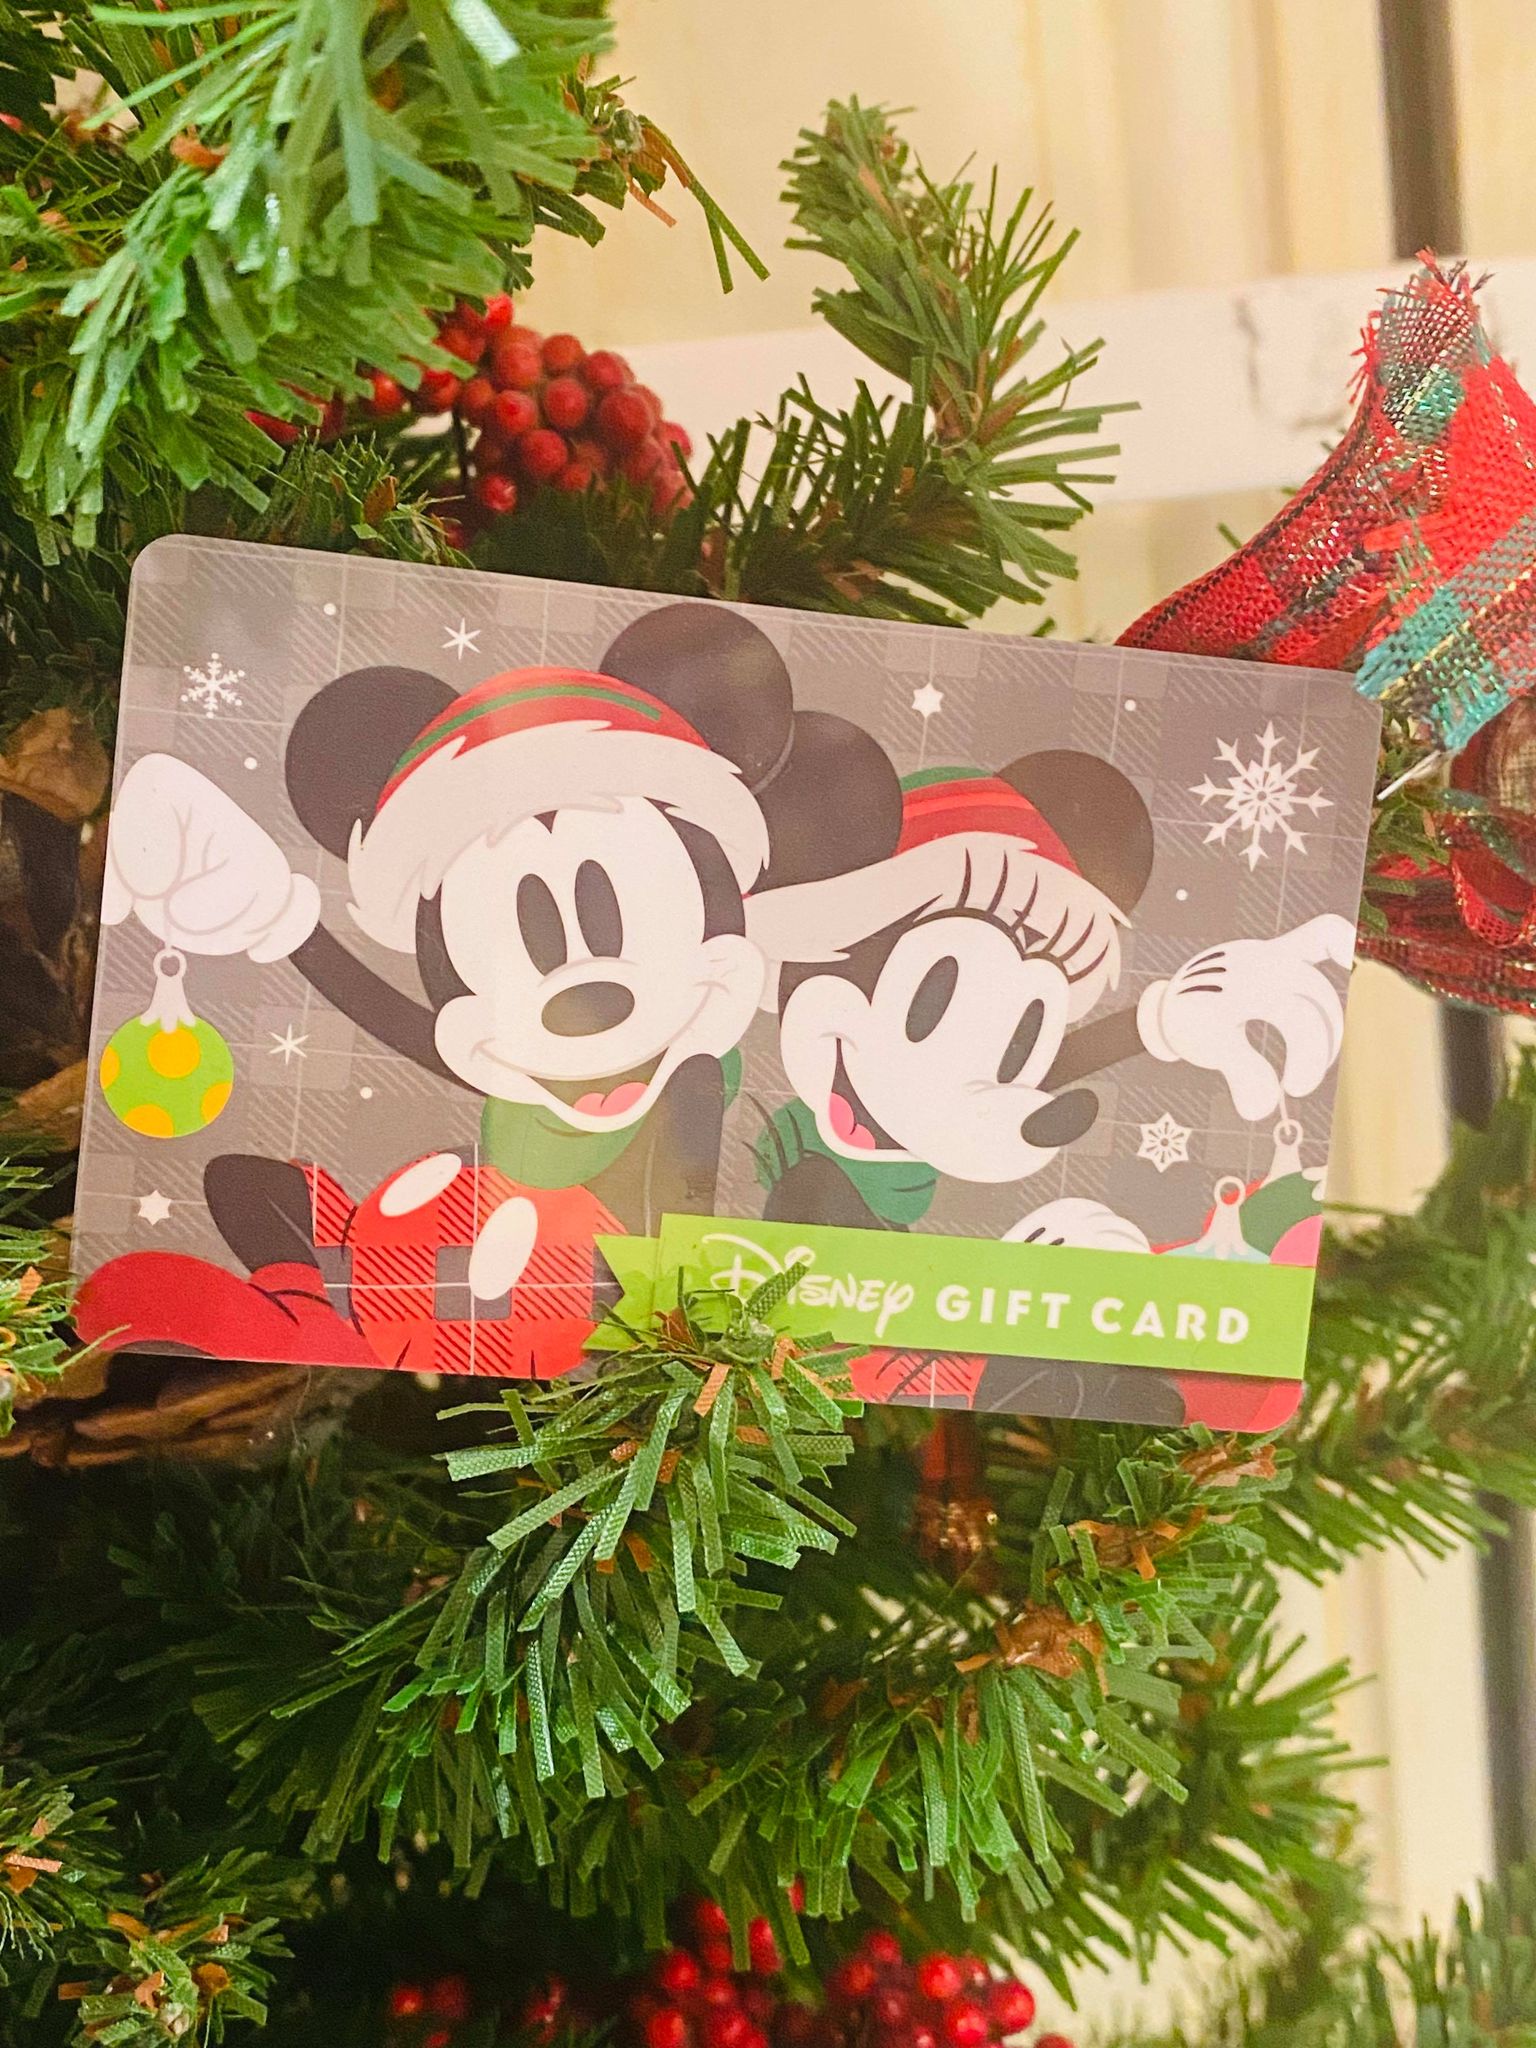 Disney Gifts Cards Make Perfect Holiday Gifts! - MickeyBlog.com